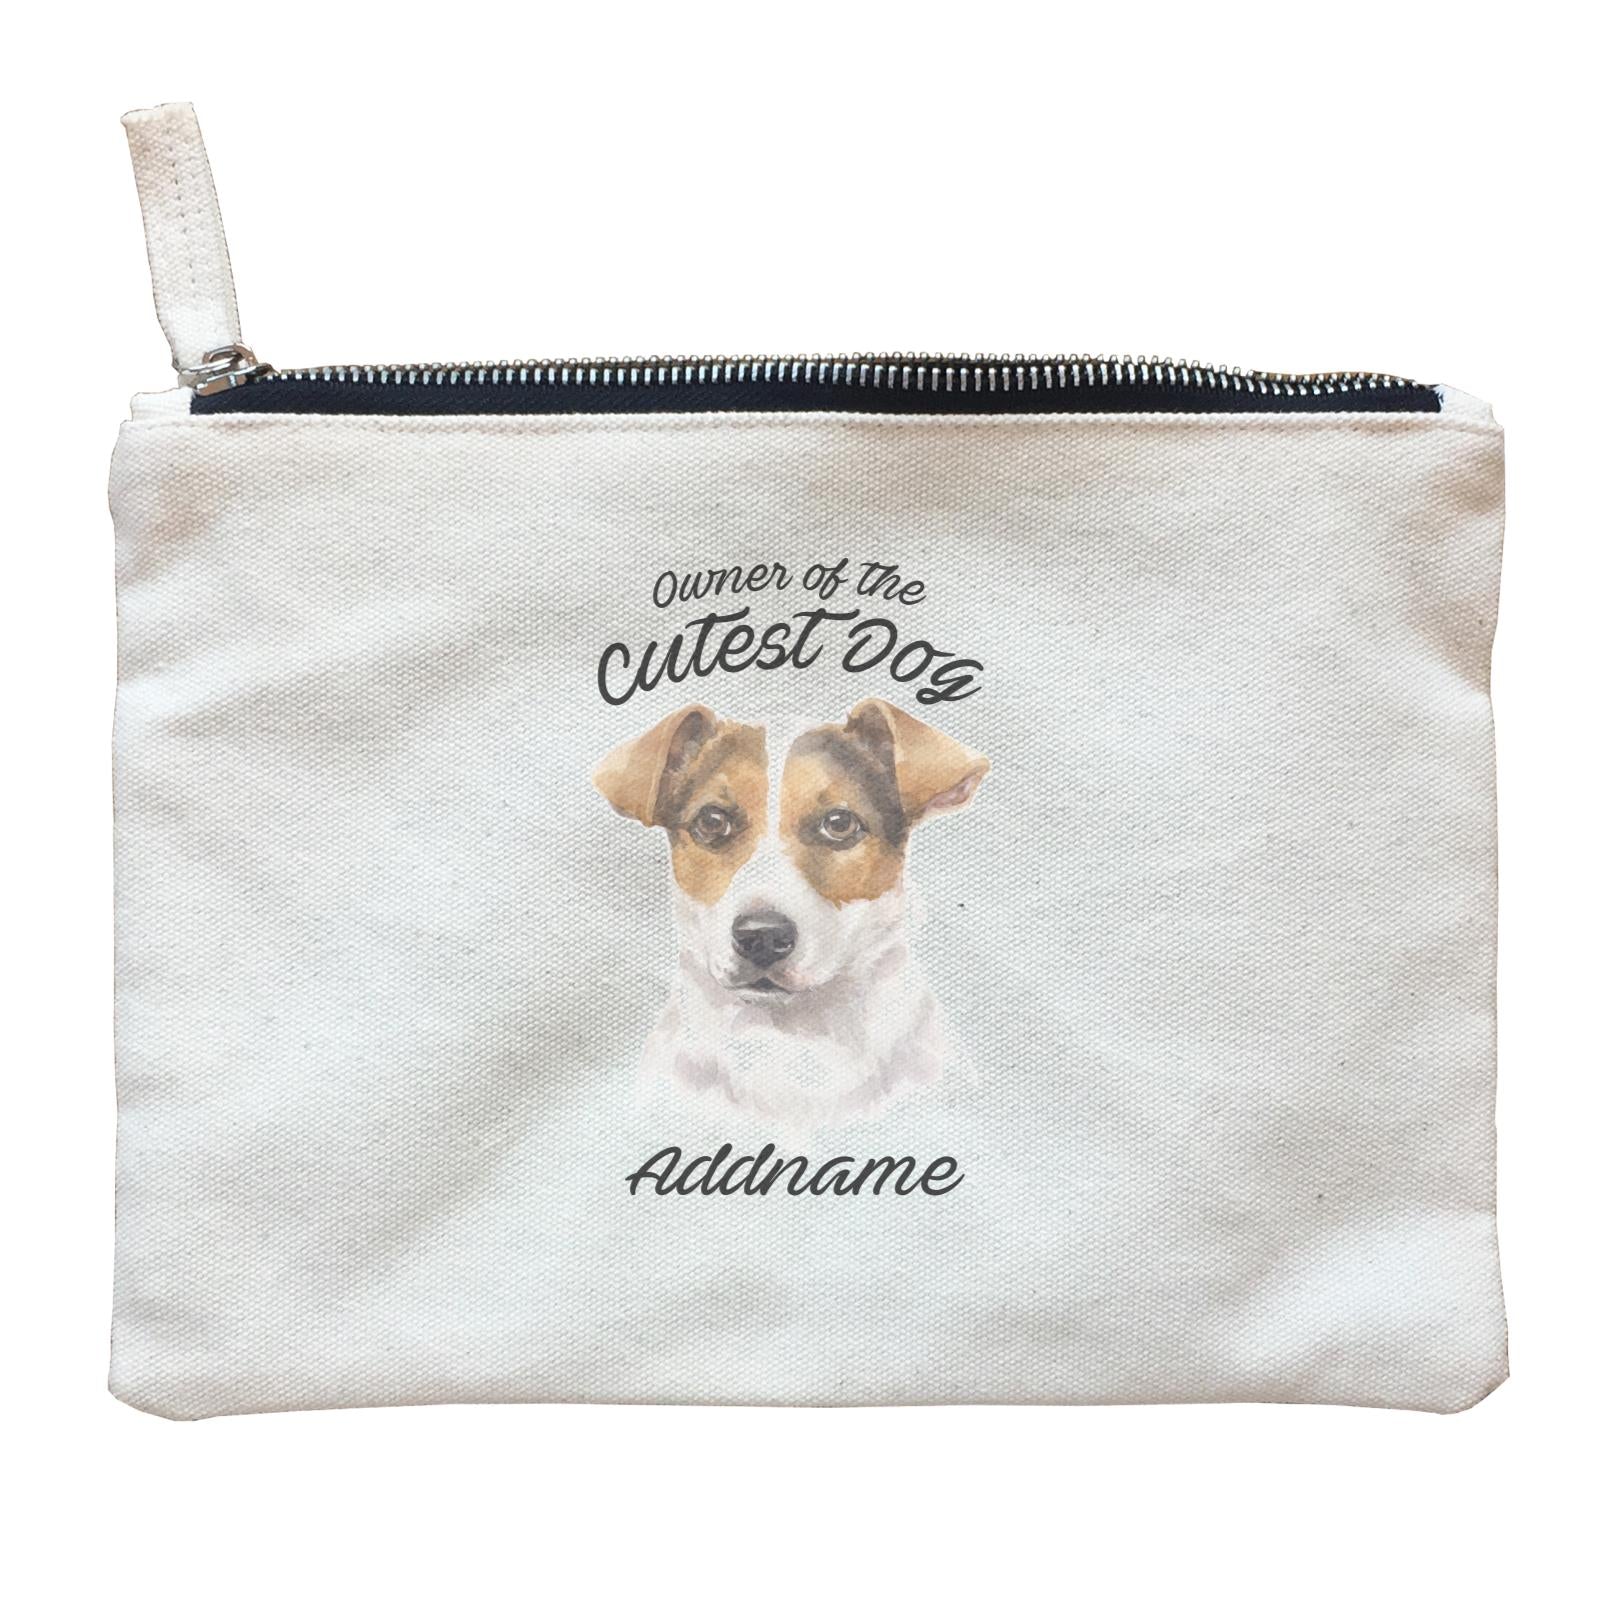 Watercolor Dog Owner Of The Cutest Dog Jack Russell Short Hair Addname Zipper Pouch